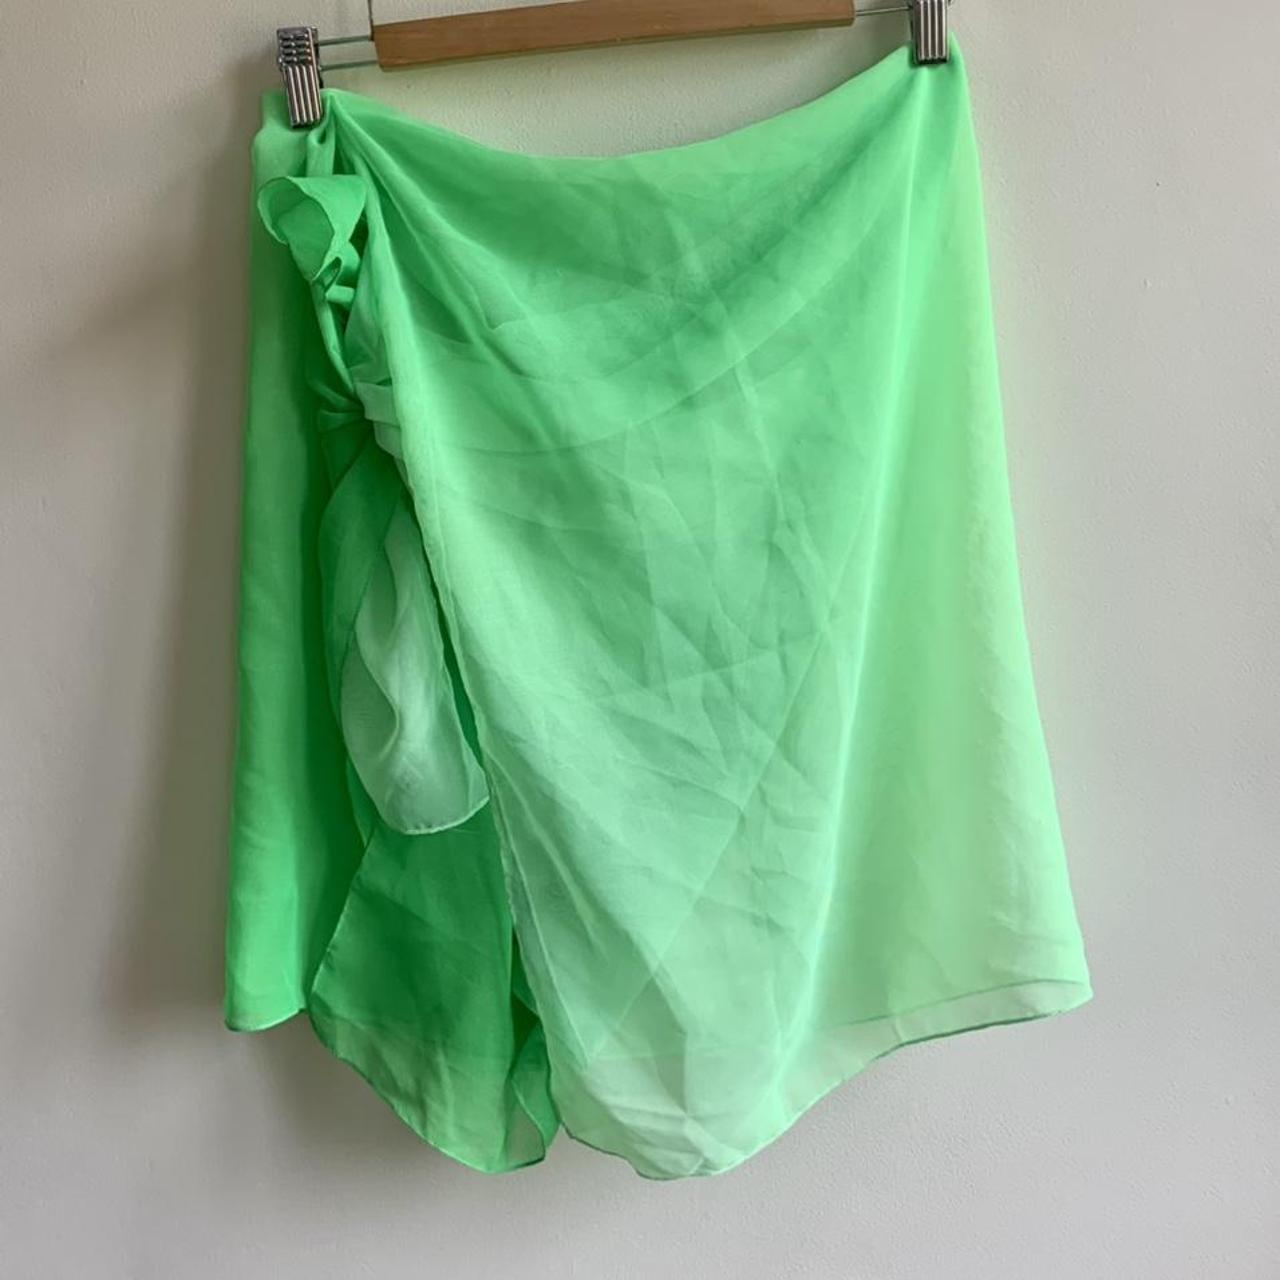 Fluro green lime ombré sarong cover up - can be worn... - Depop